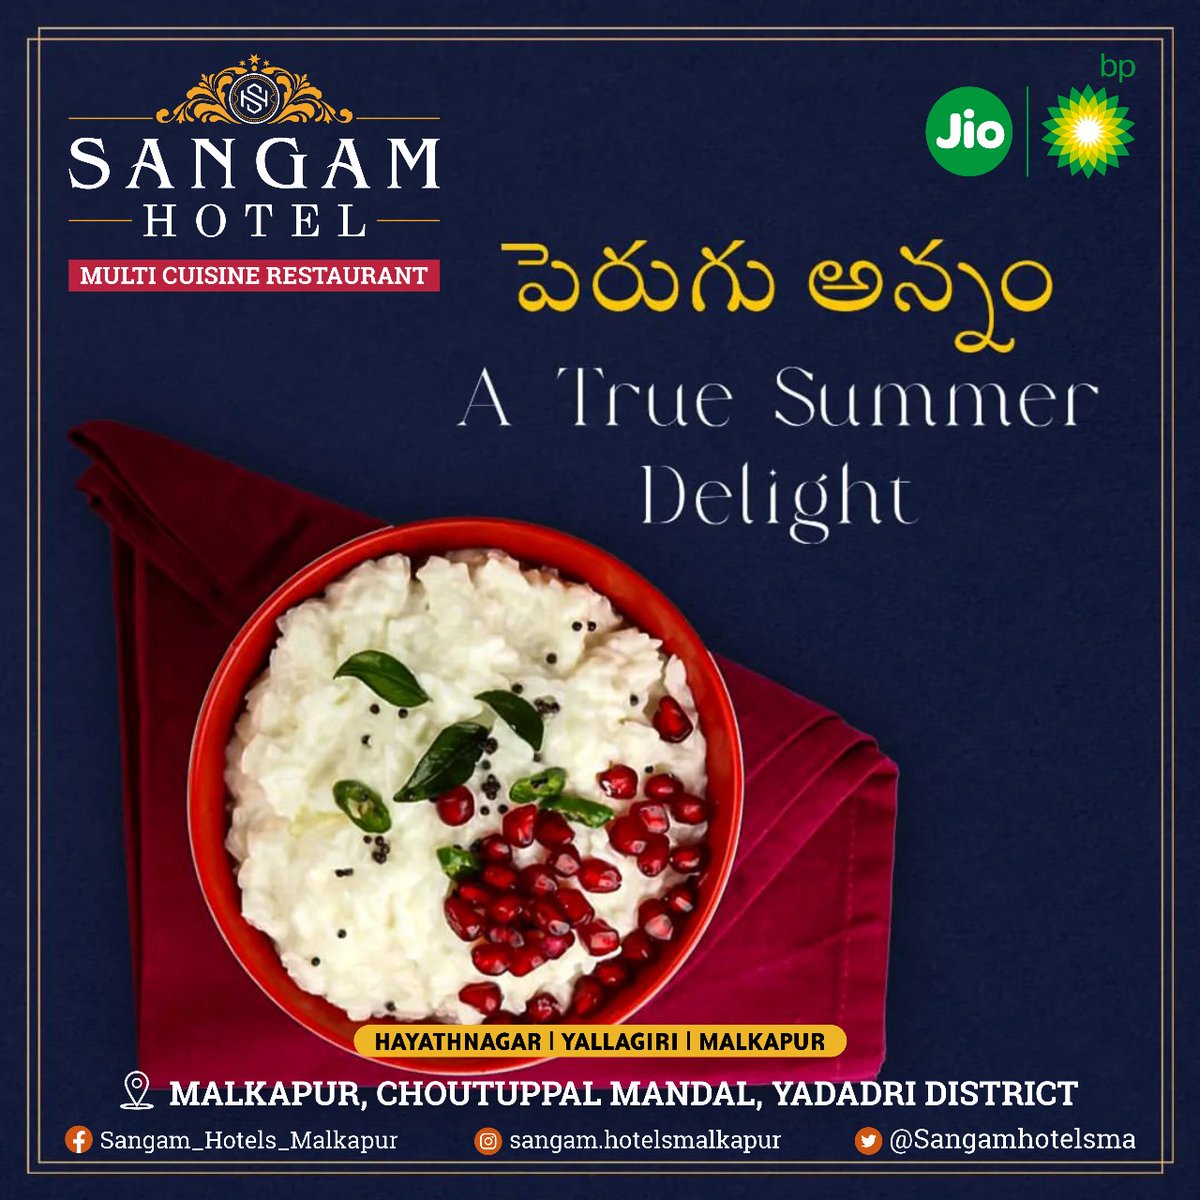 A True Summer Delight! @Sangamhotelsma #curdrice #foodie #southindianfood #curd #foodphotography #food #foodporn #indianfood #instafood #foodblogger #lunch #foodlover #healthyfood #foodstagram #rice #yummy #homemade #foodiesofinstagram #delicious #homecooking #indianfoodie